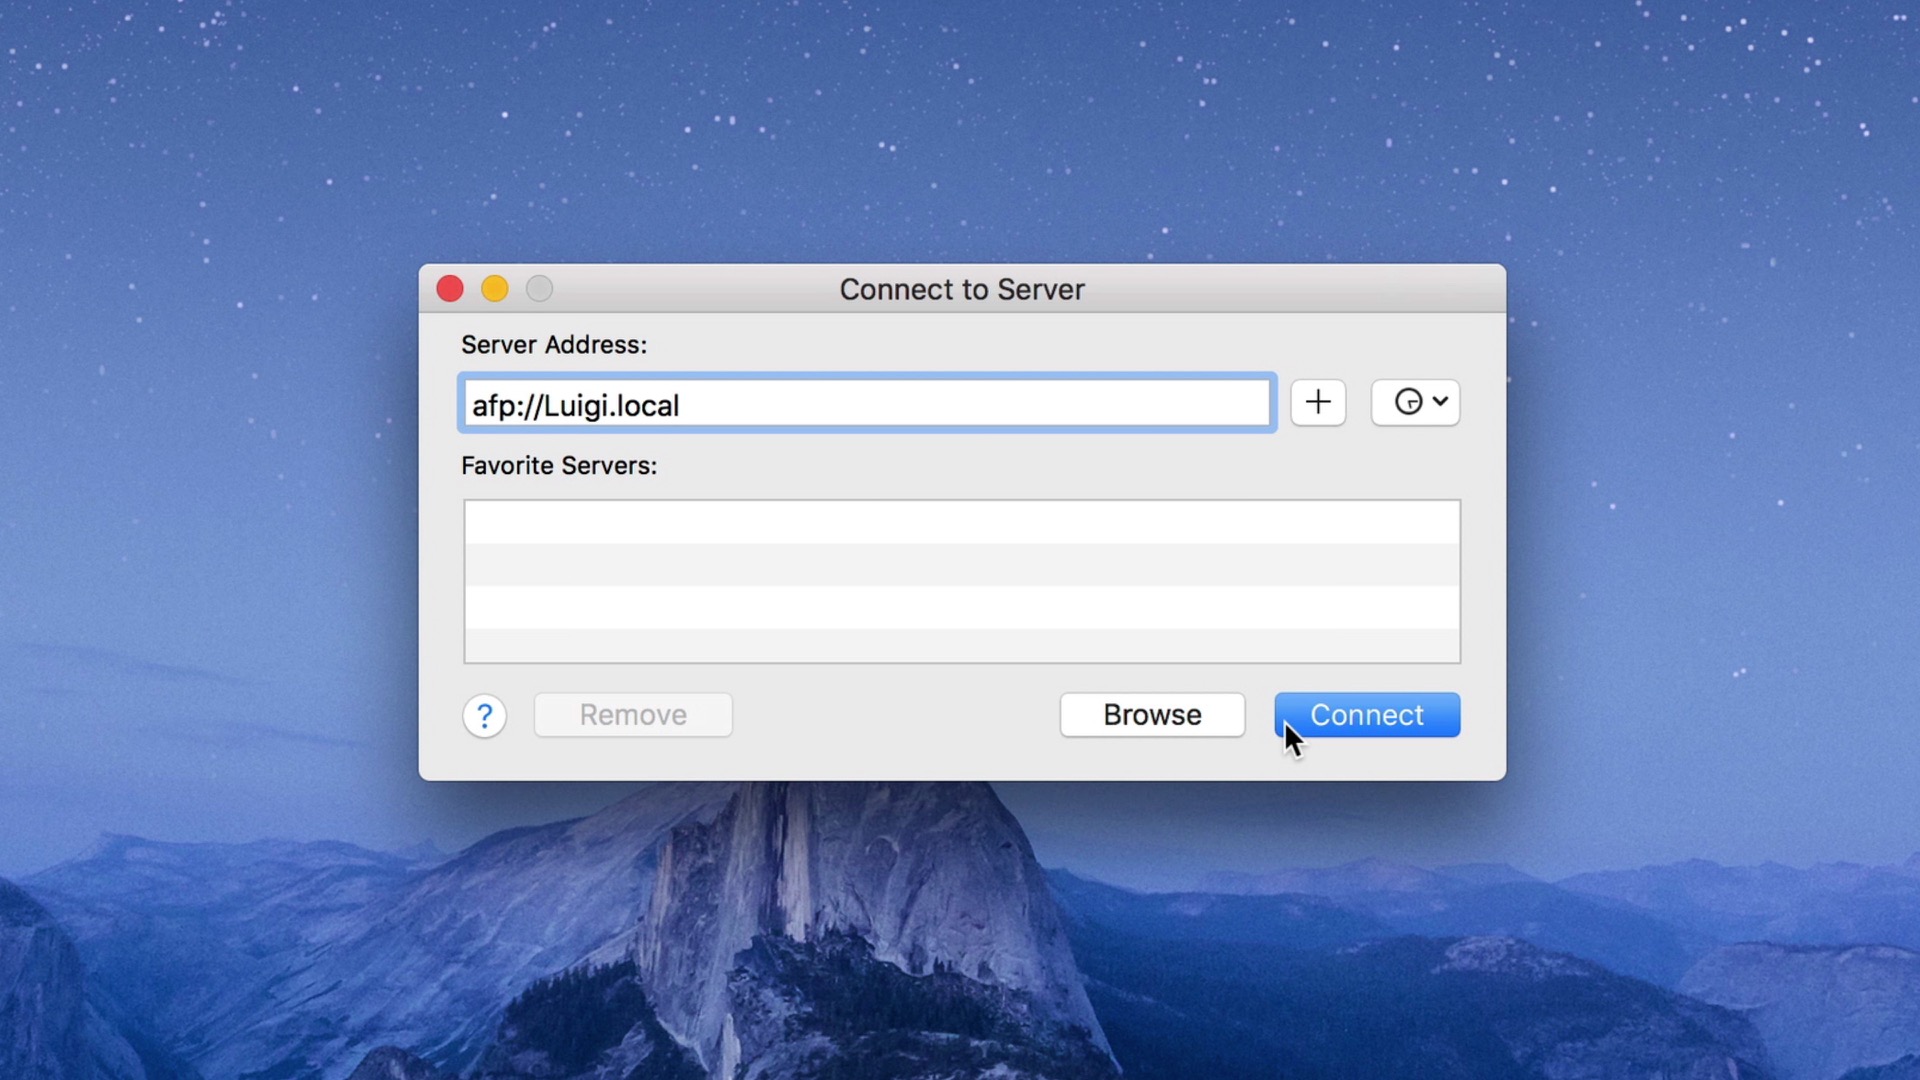 mac keeps asking for password backup didc